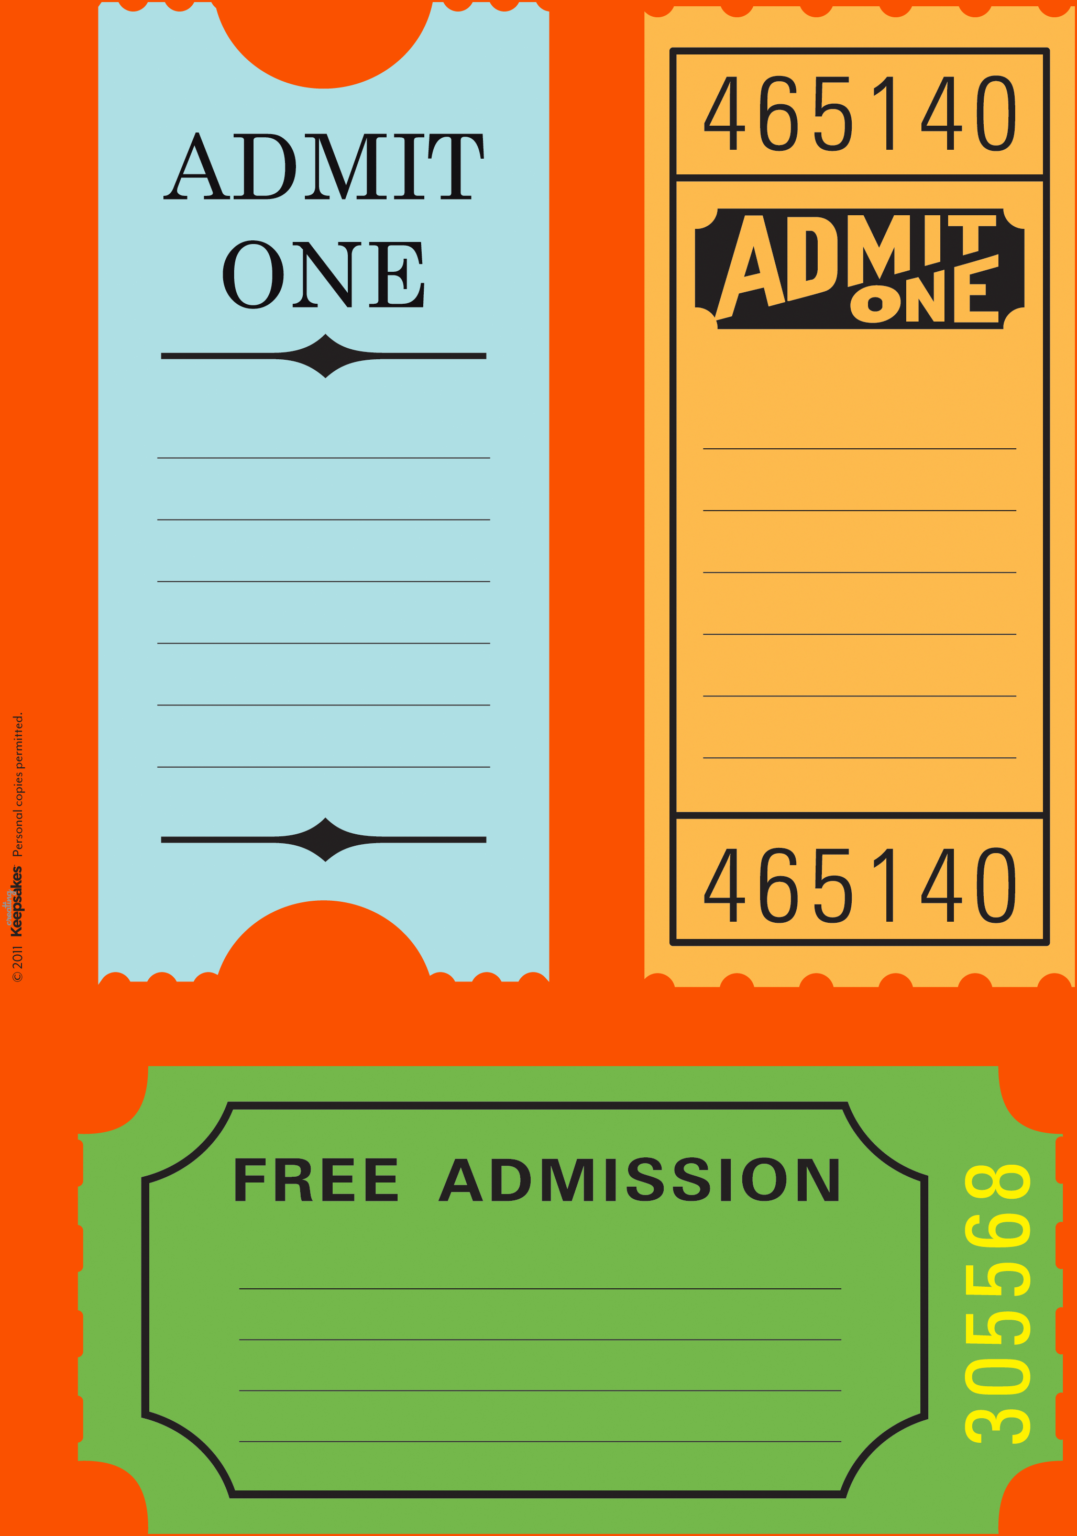 023-free-printable-ticket-templates-travel-tickets-intended-for-blank